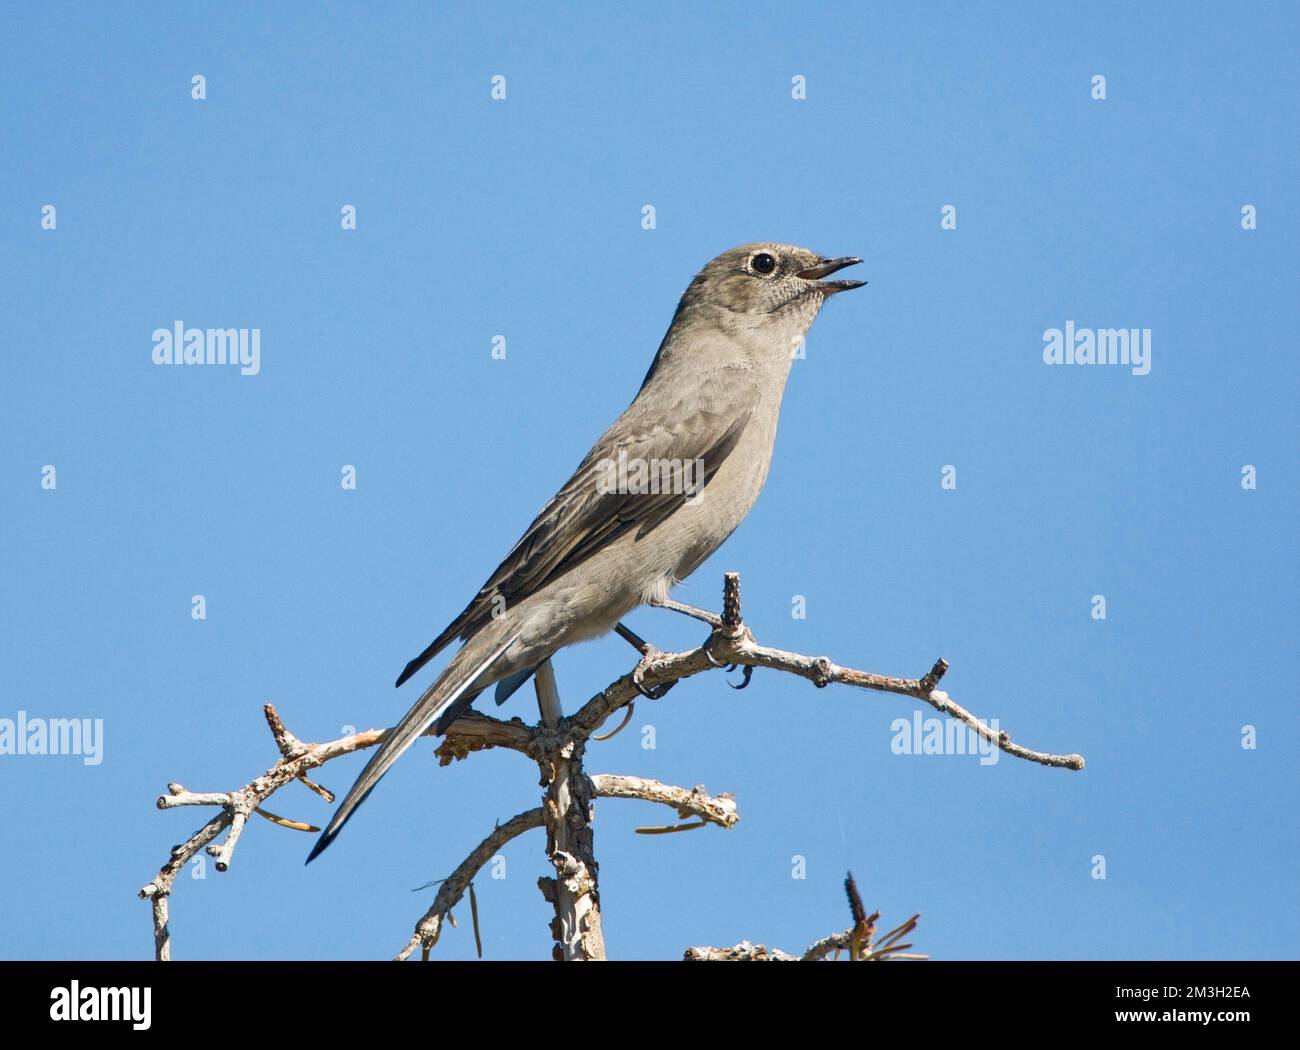 Townsend-solitaire zingend, Townsends solitaire singng Foto Stock